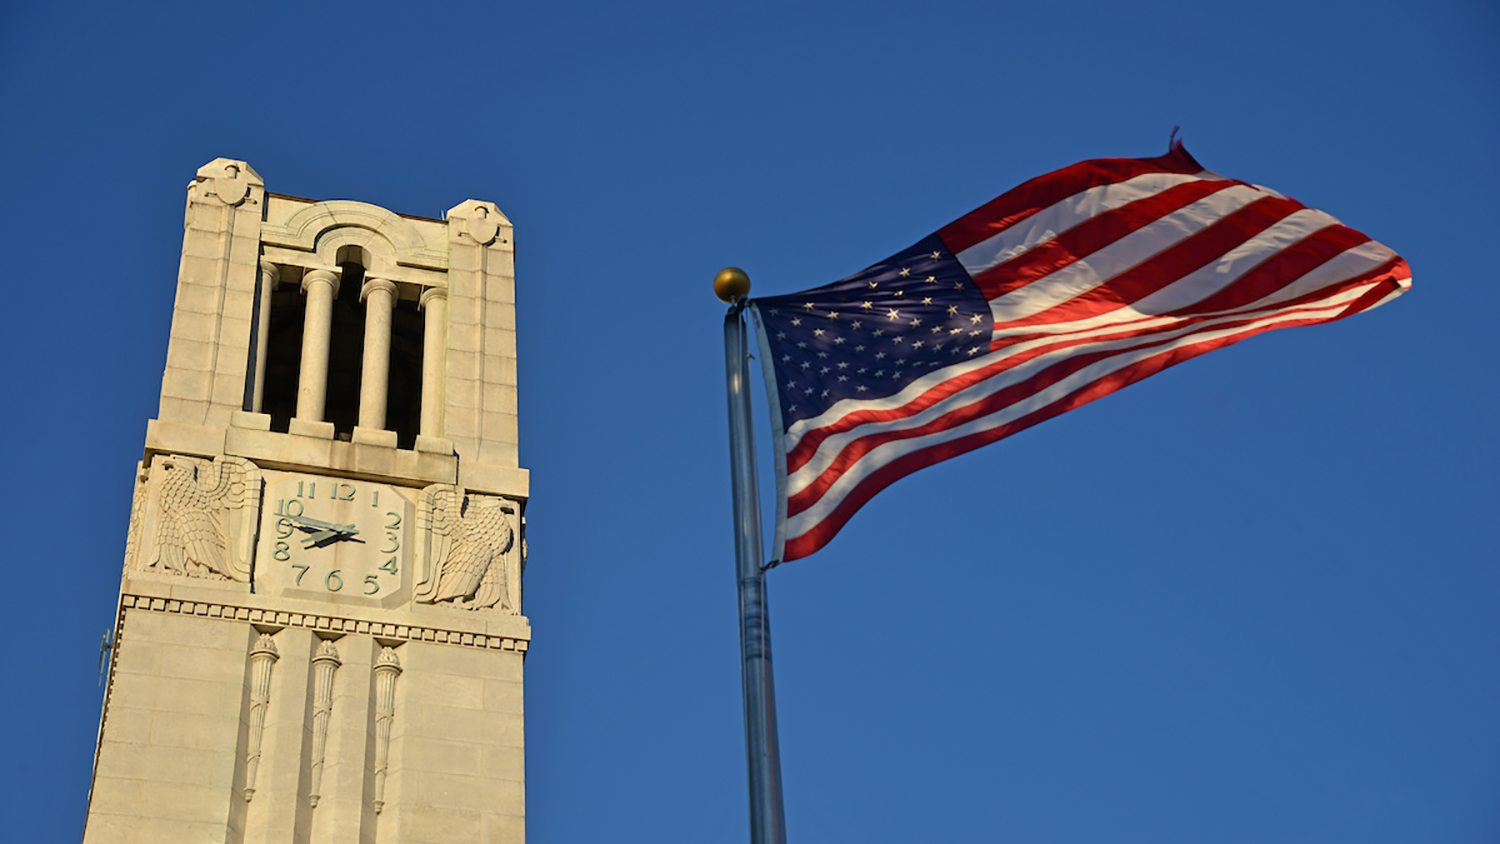 Early morning sun cuts across the Memorial Belltower and the American flag.